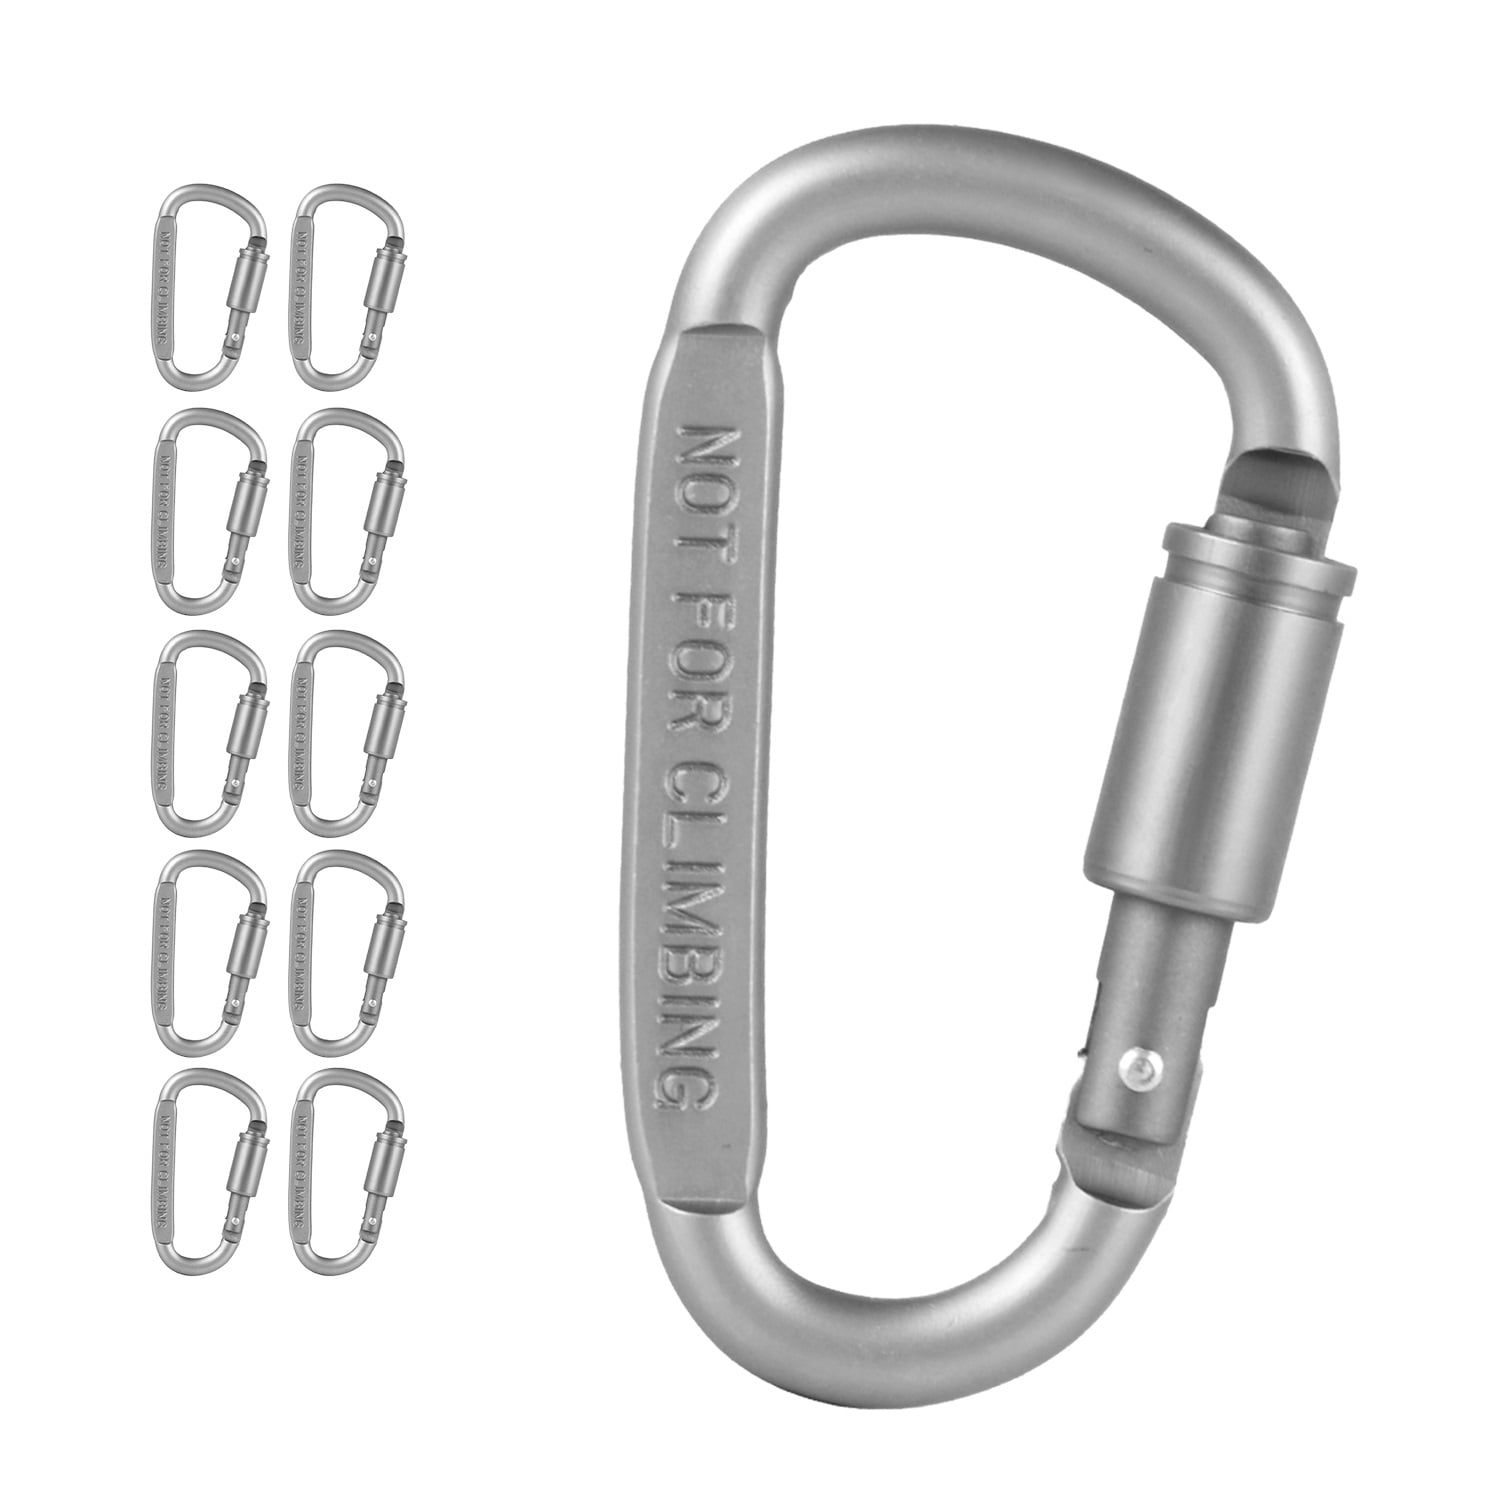 10pcs Screwgate Lock Keychain Clips Carabiner - 8 Cm Aluminum Durable  D-shape Spring Loaded Clip For Home, Rv, Camping, Fishing, Hiking